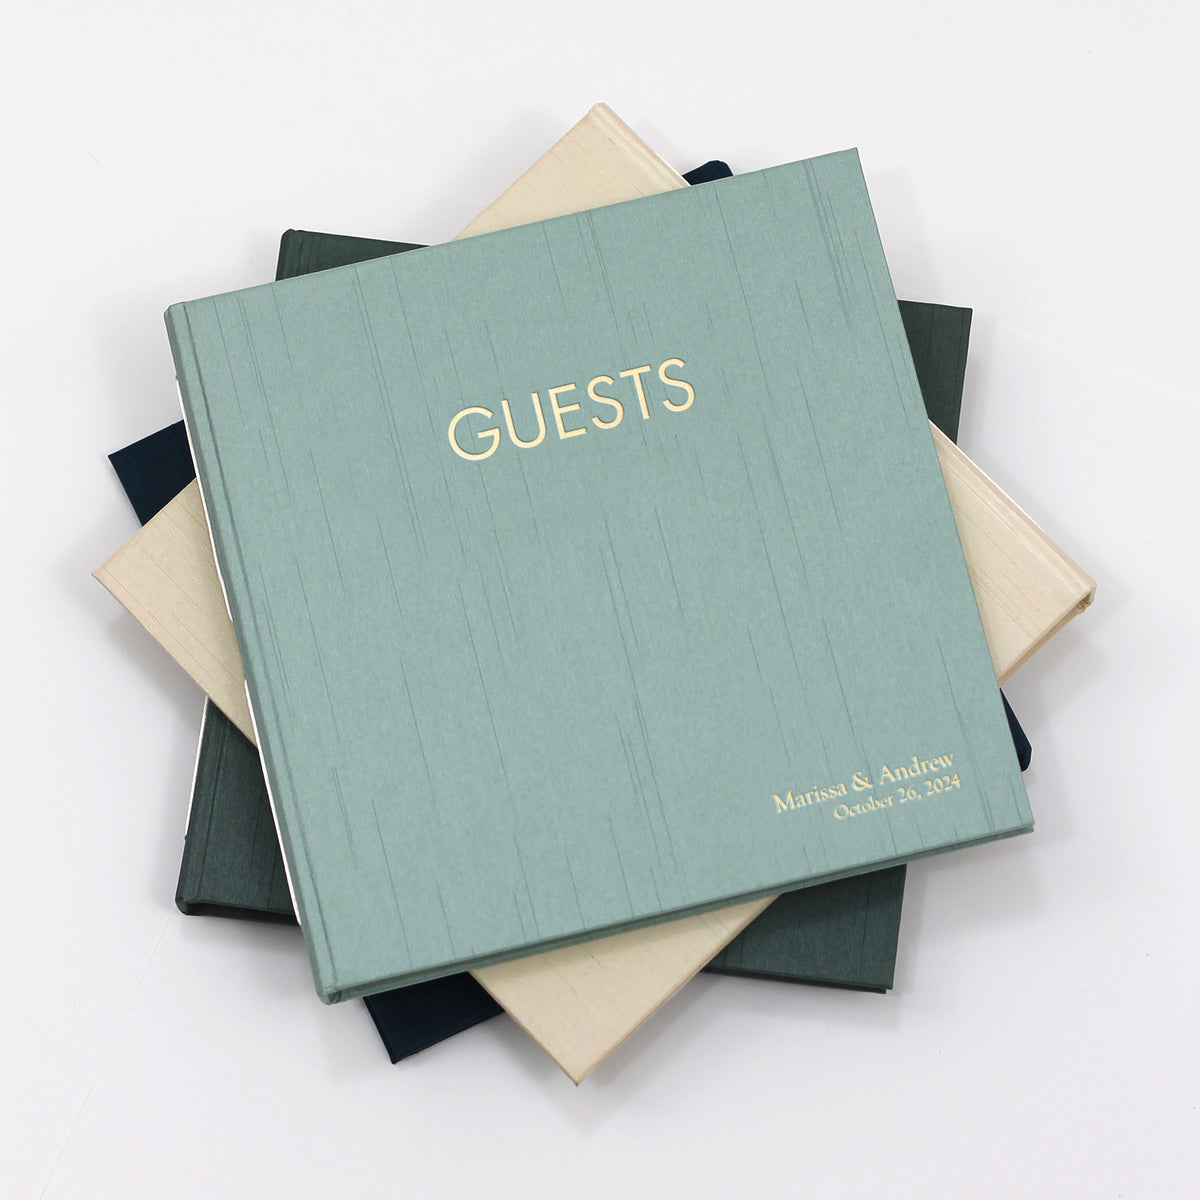 Event Guestbook Embossed with “Guests” | Cover: Lavender Cotton | Available Personalized